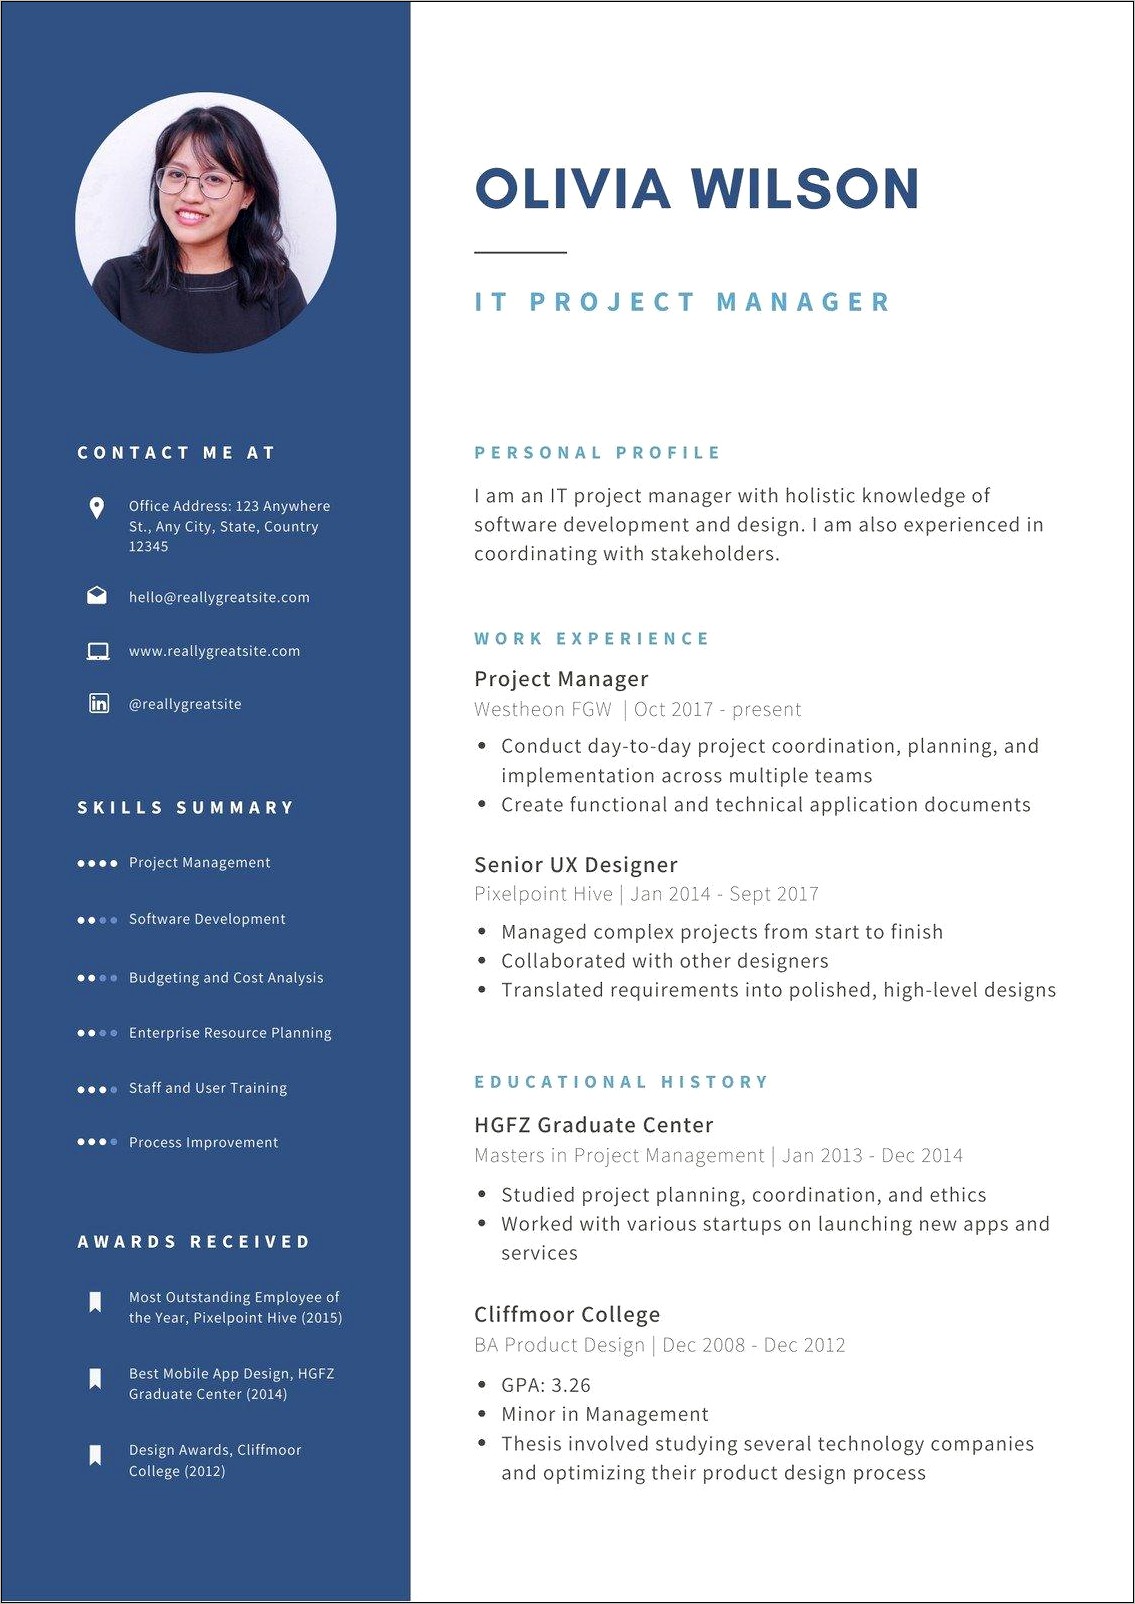 Templates For Resumes Free Online